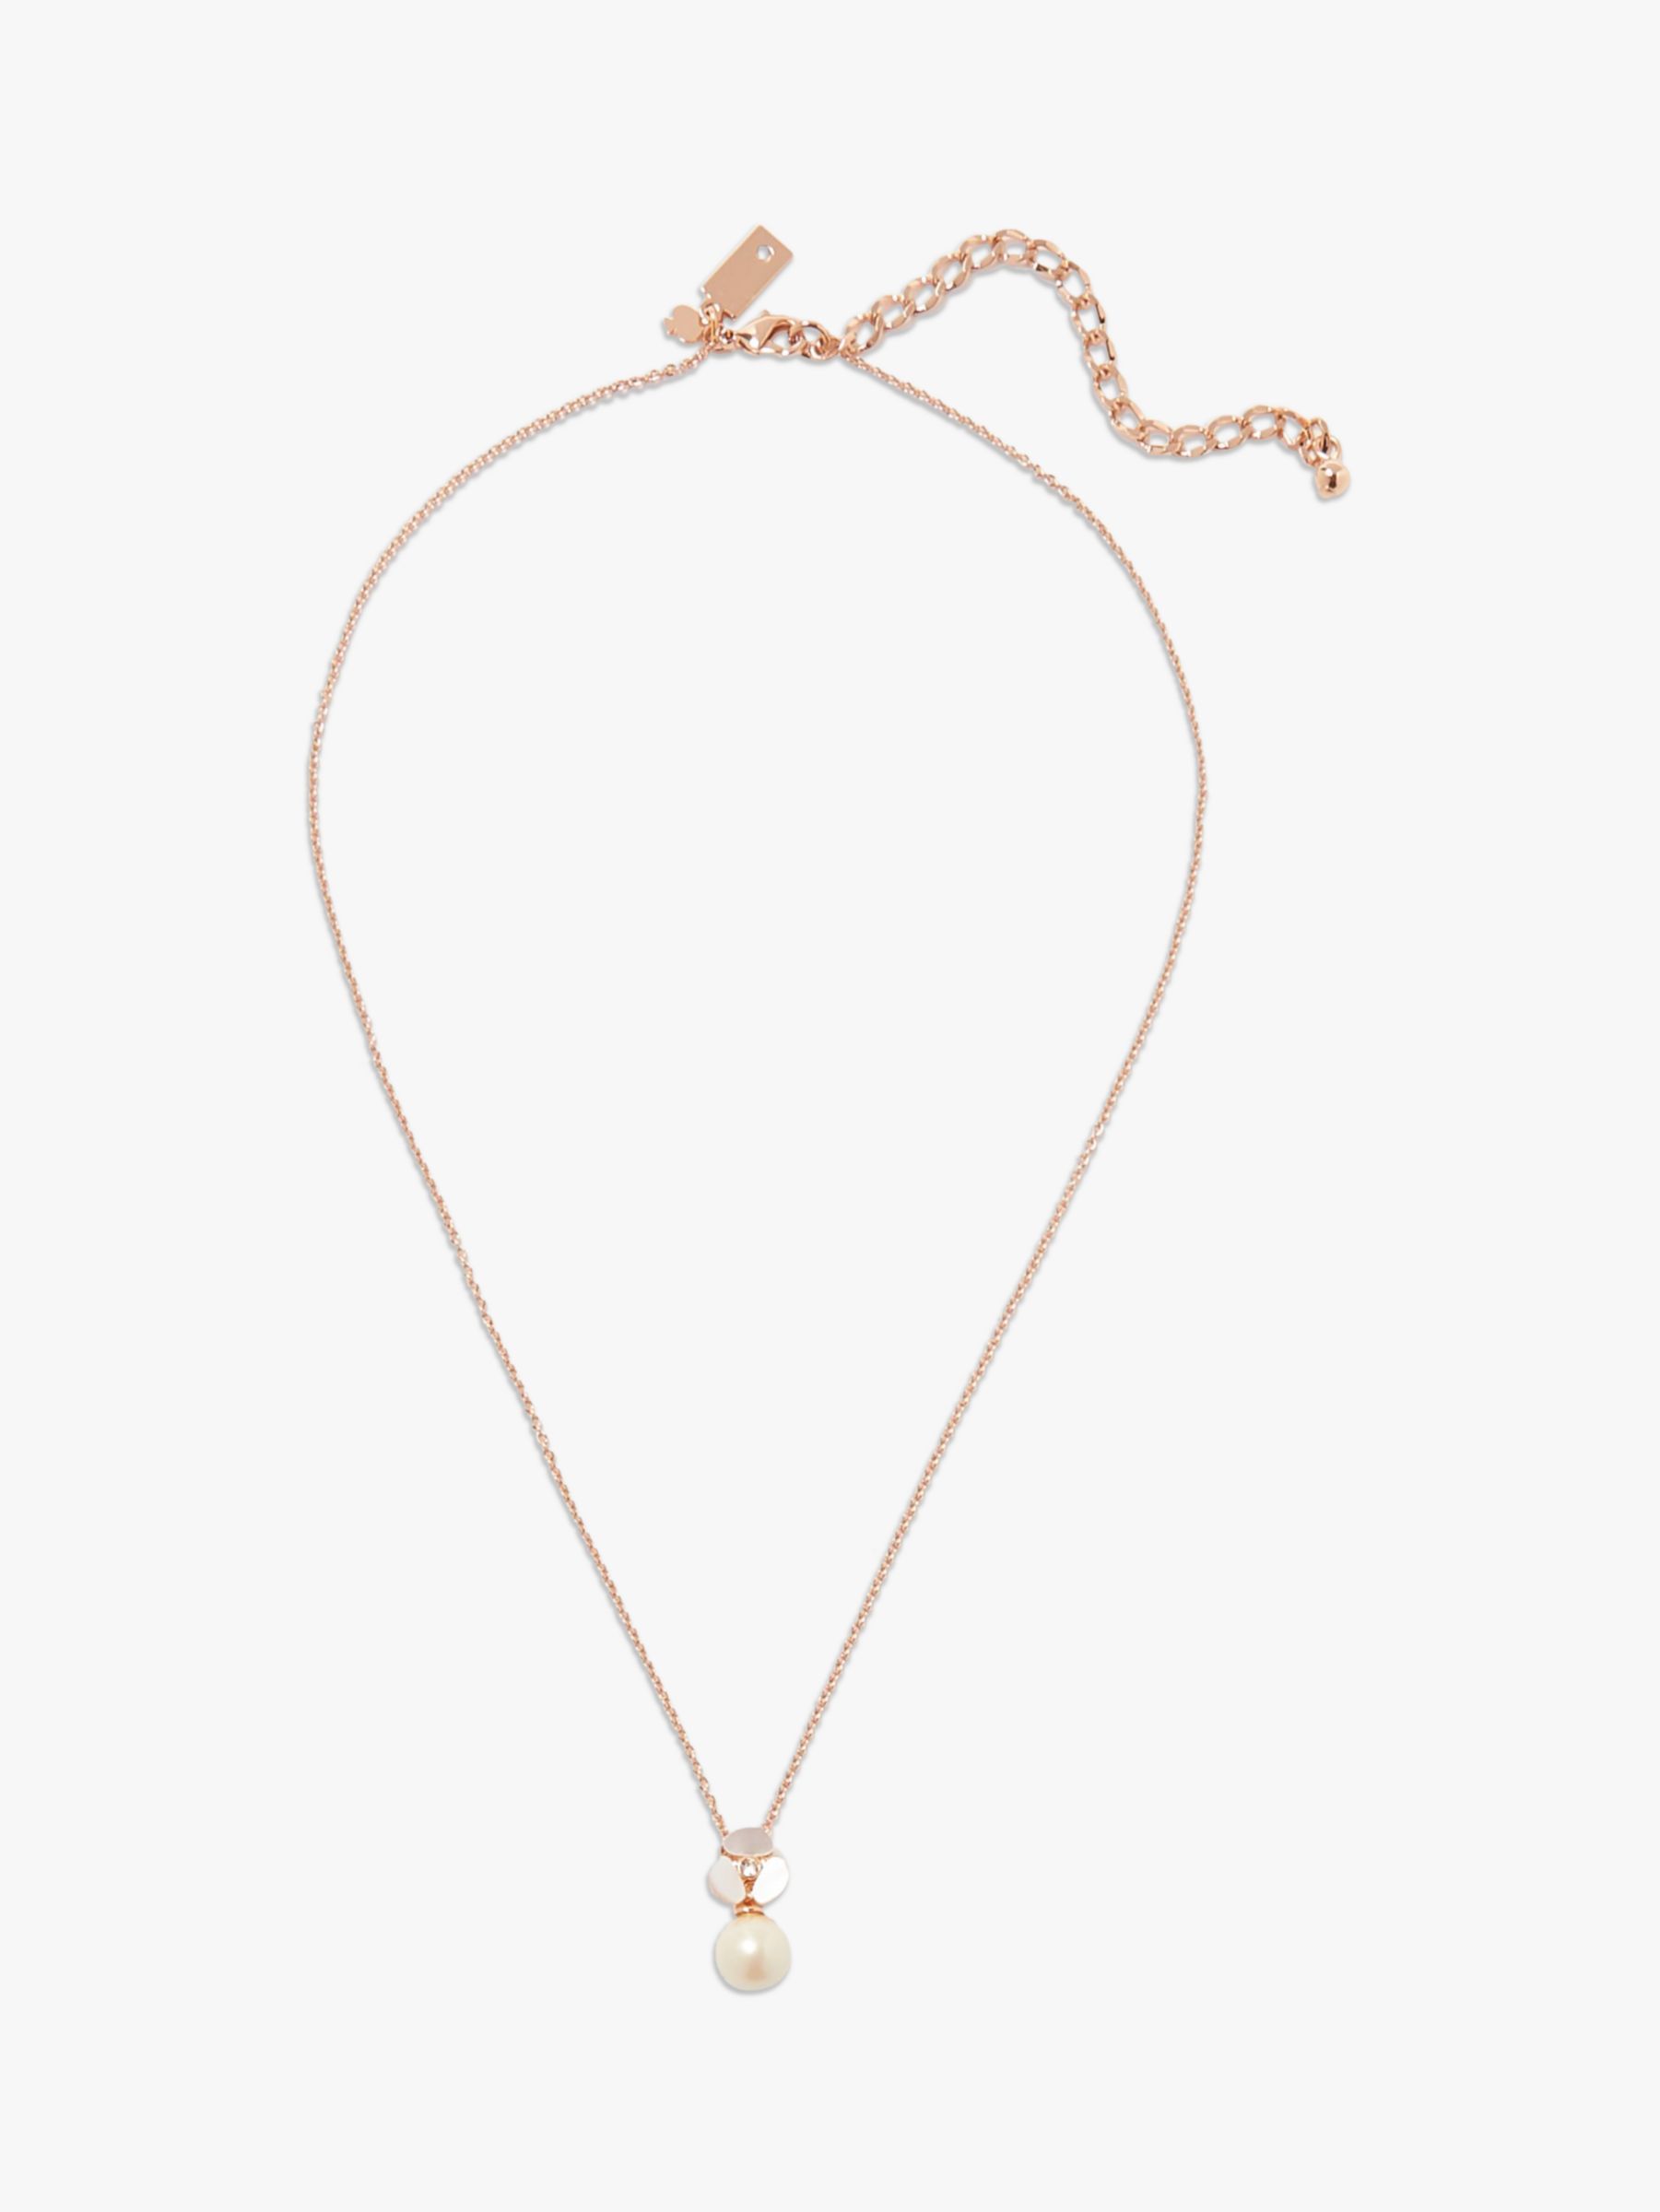 kate spade new york Mini Pansy Flower Faux Pearl Drop Pendant Necklace, Rose  Gold/Cream